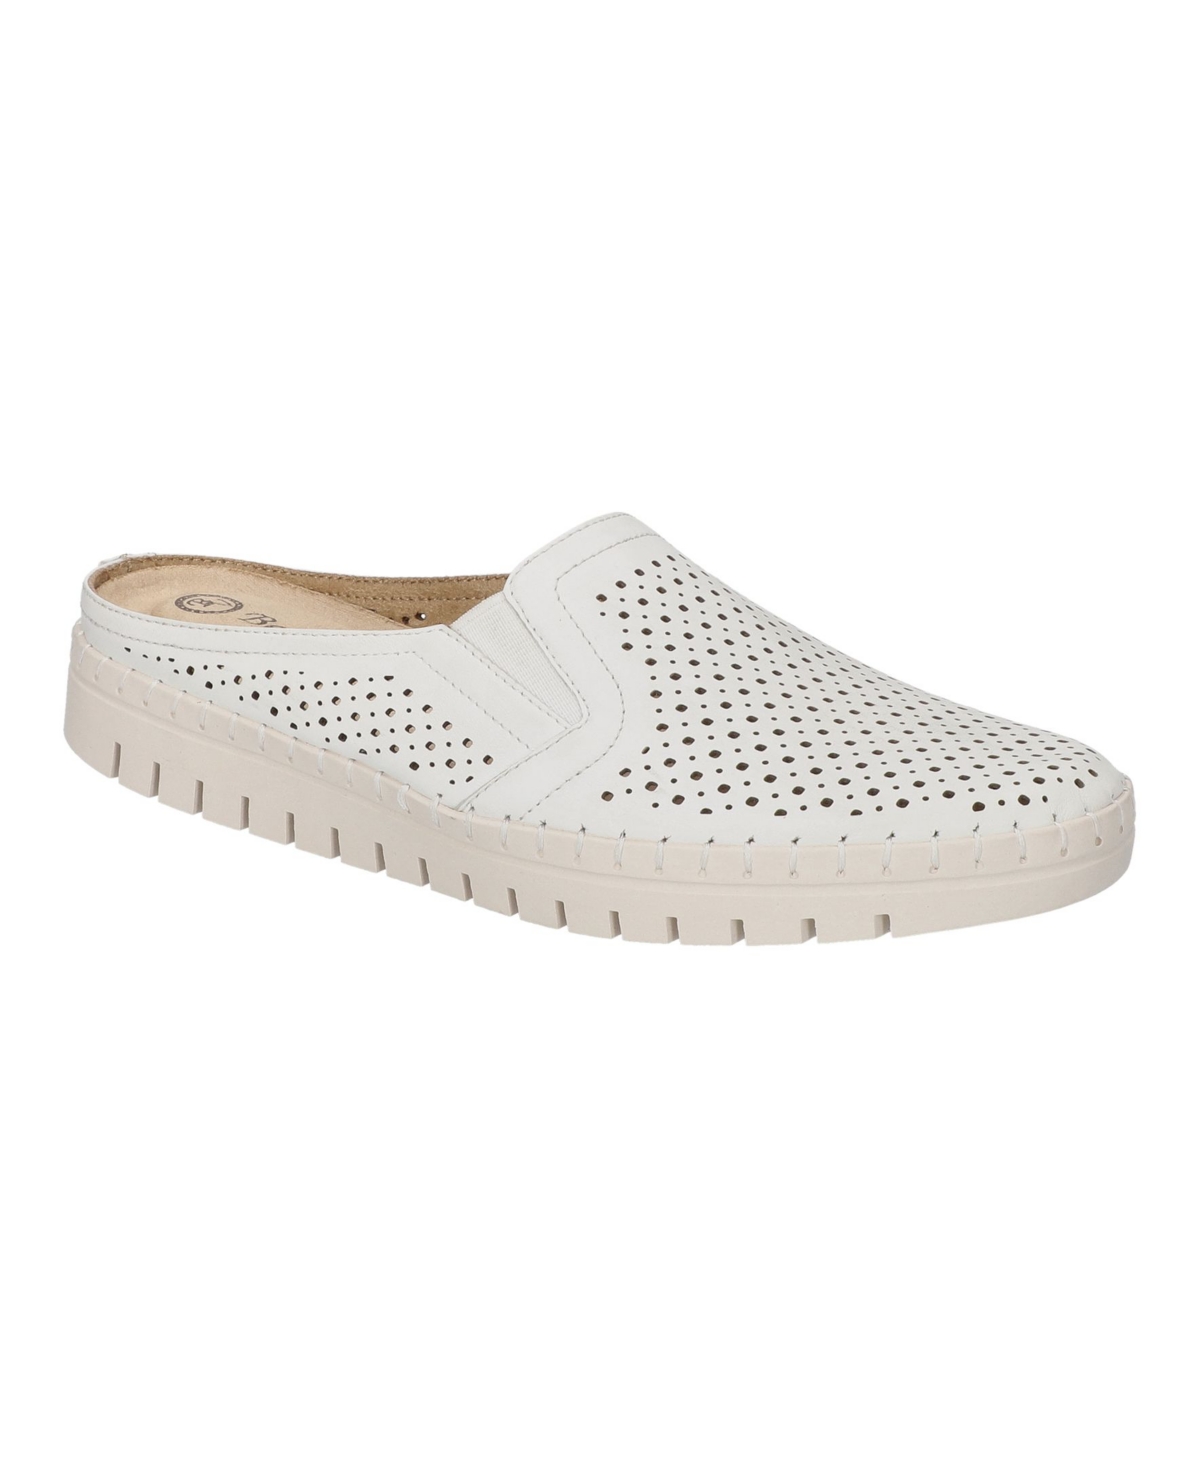 Women's Refresh Altheisure Mules - Natural Leather